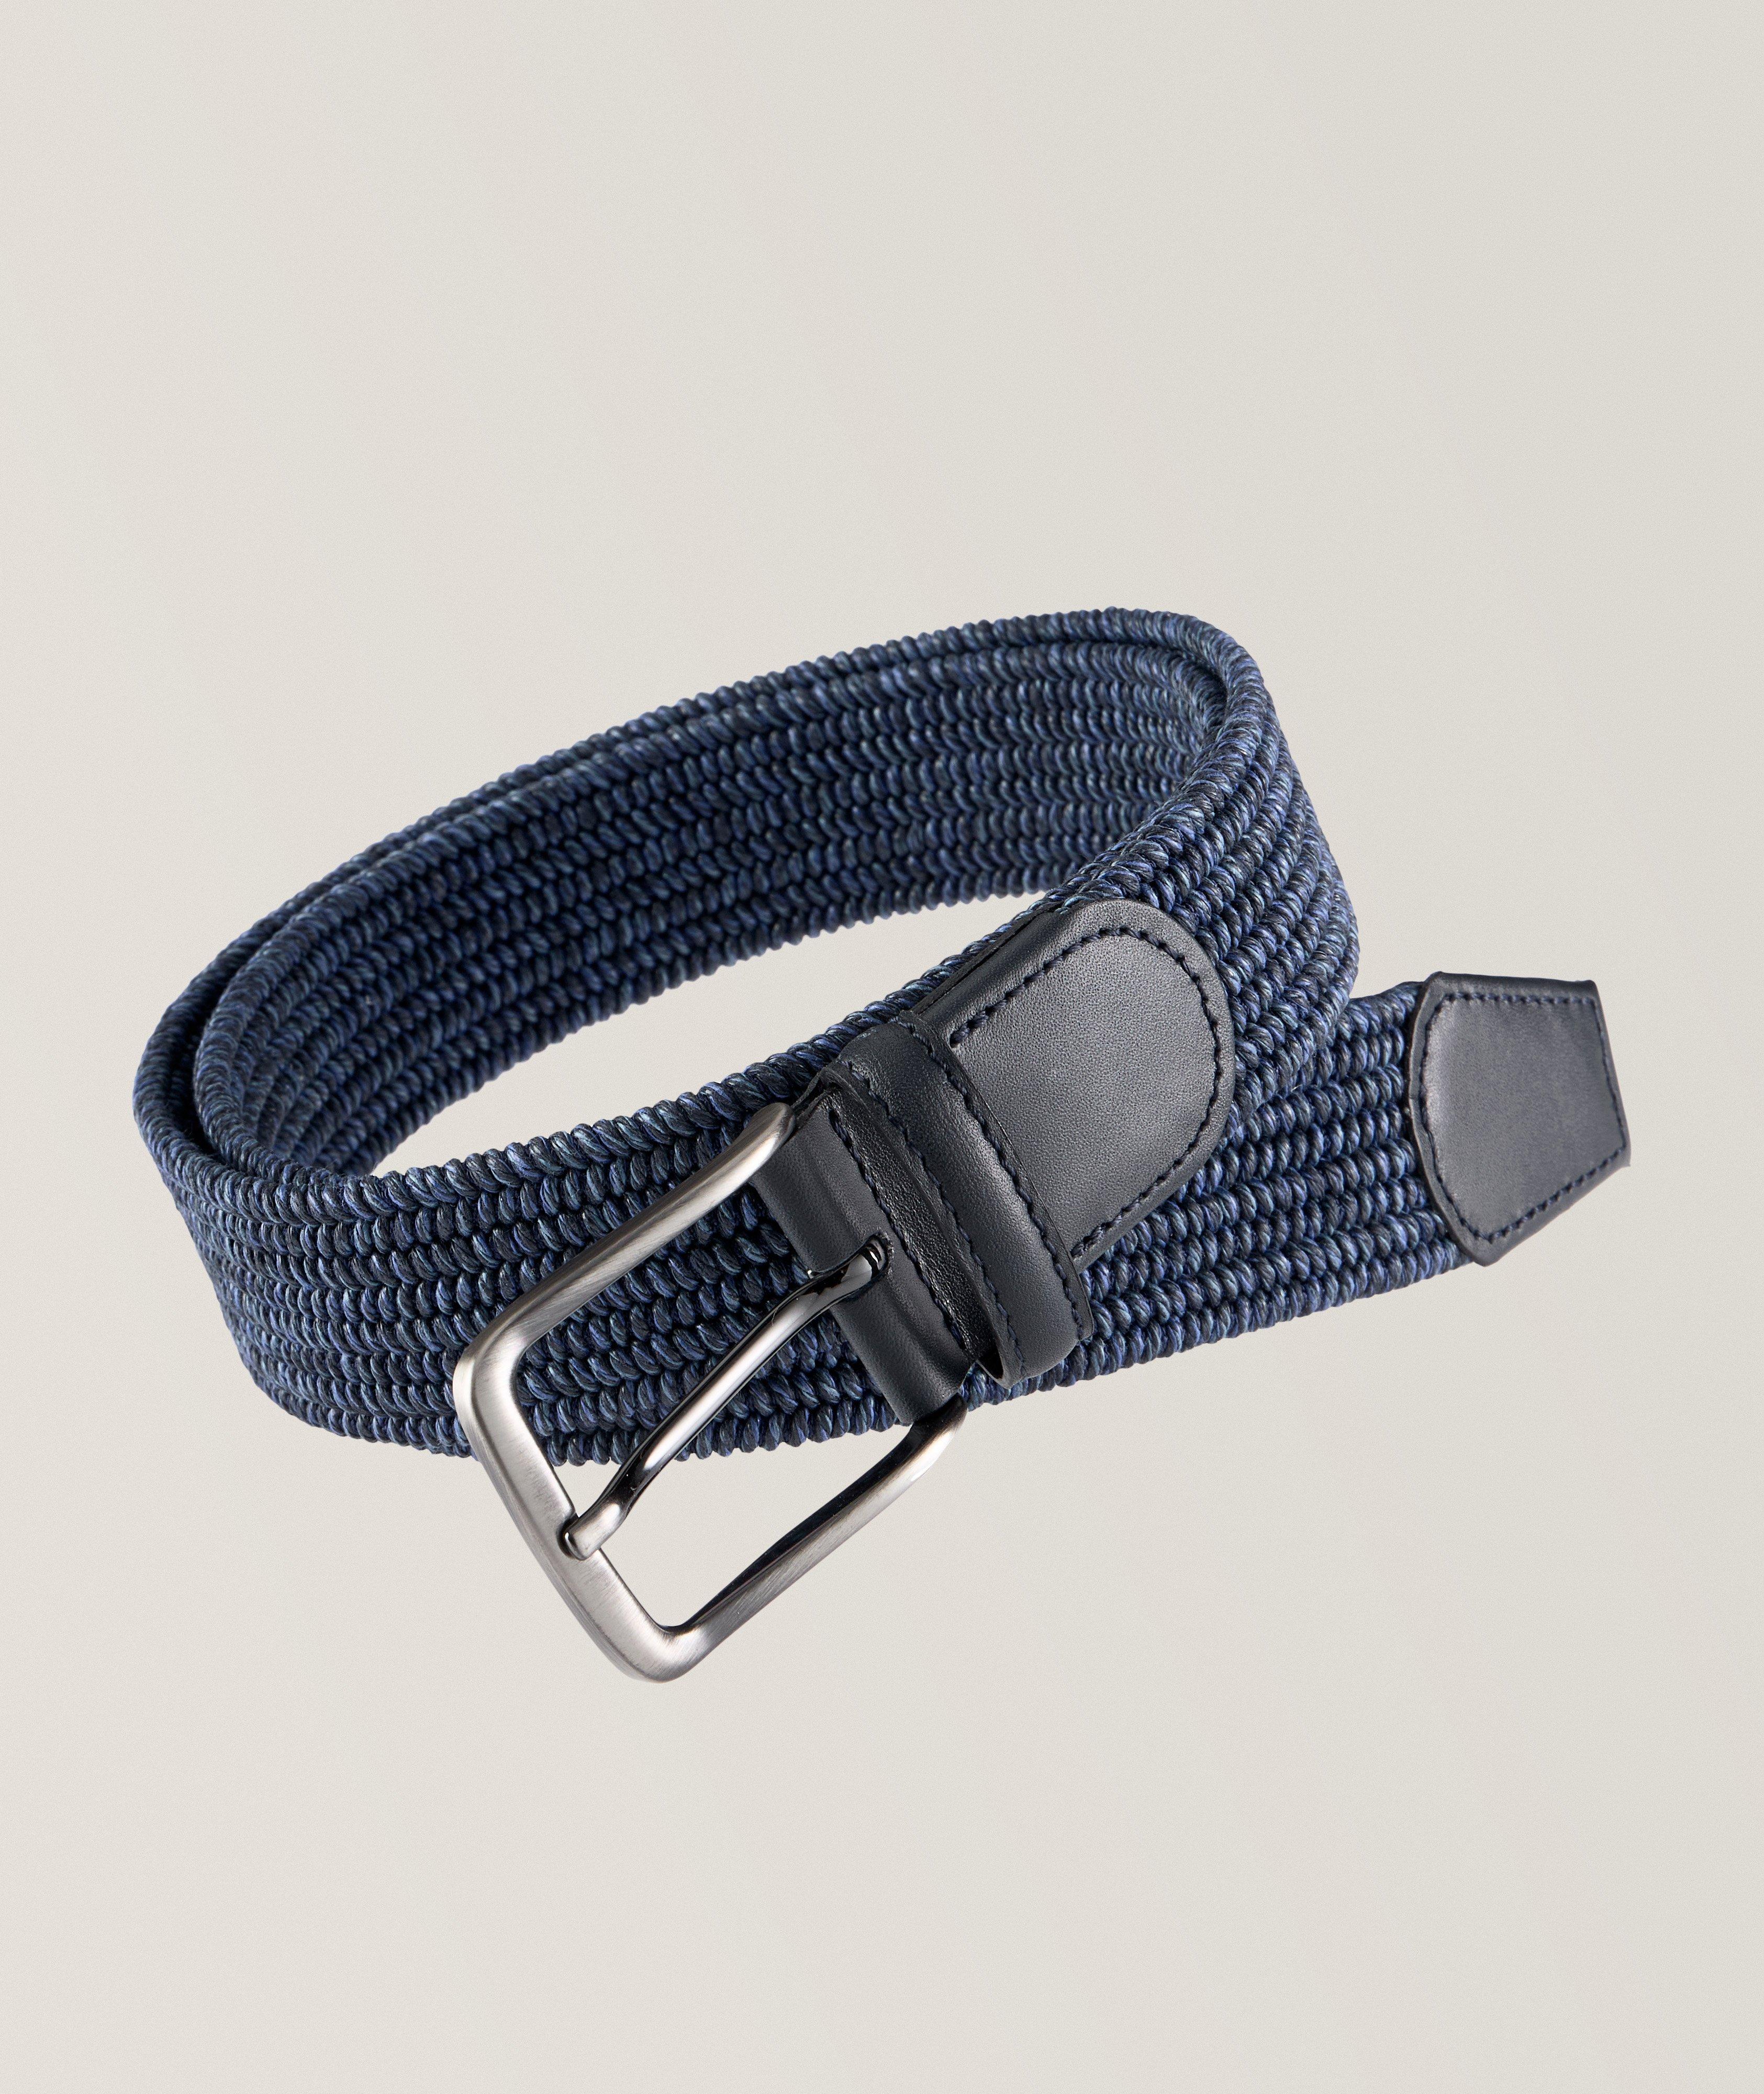 Mélange Technical-Stretch Woven Pin-Buckle Belt image 0